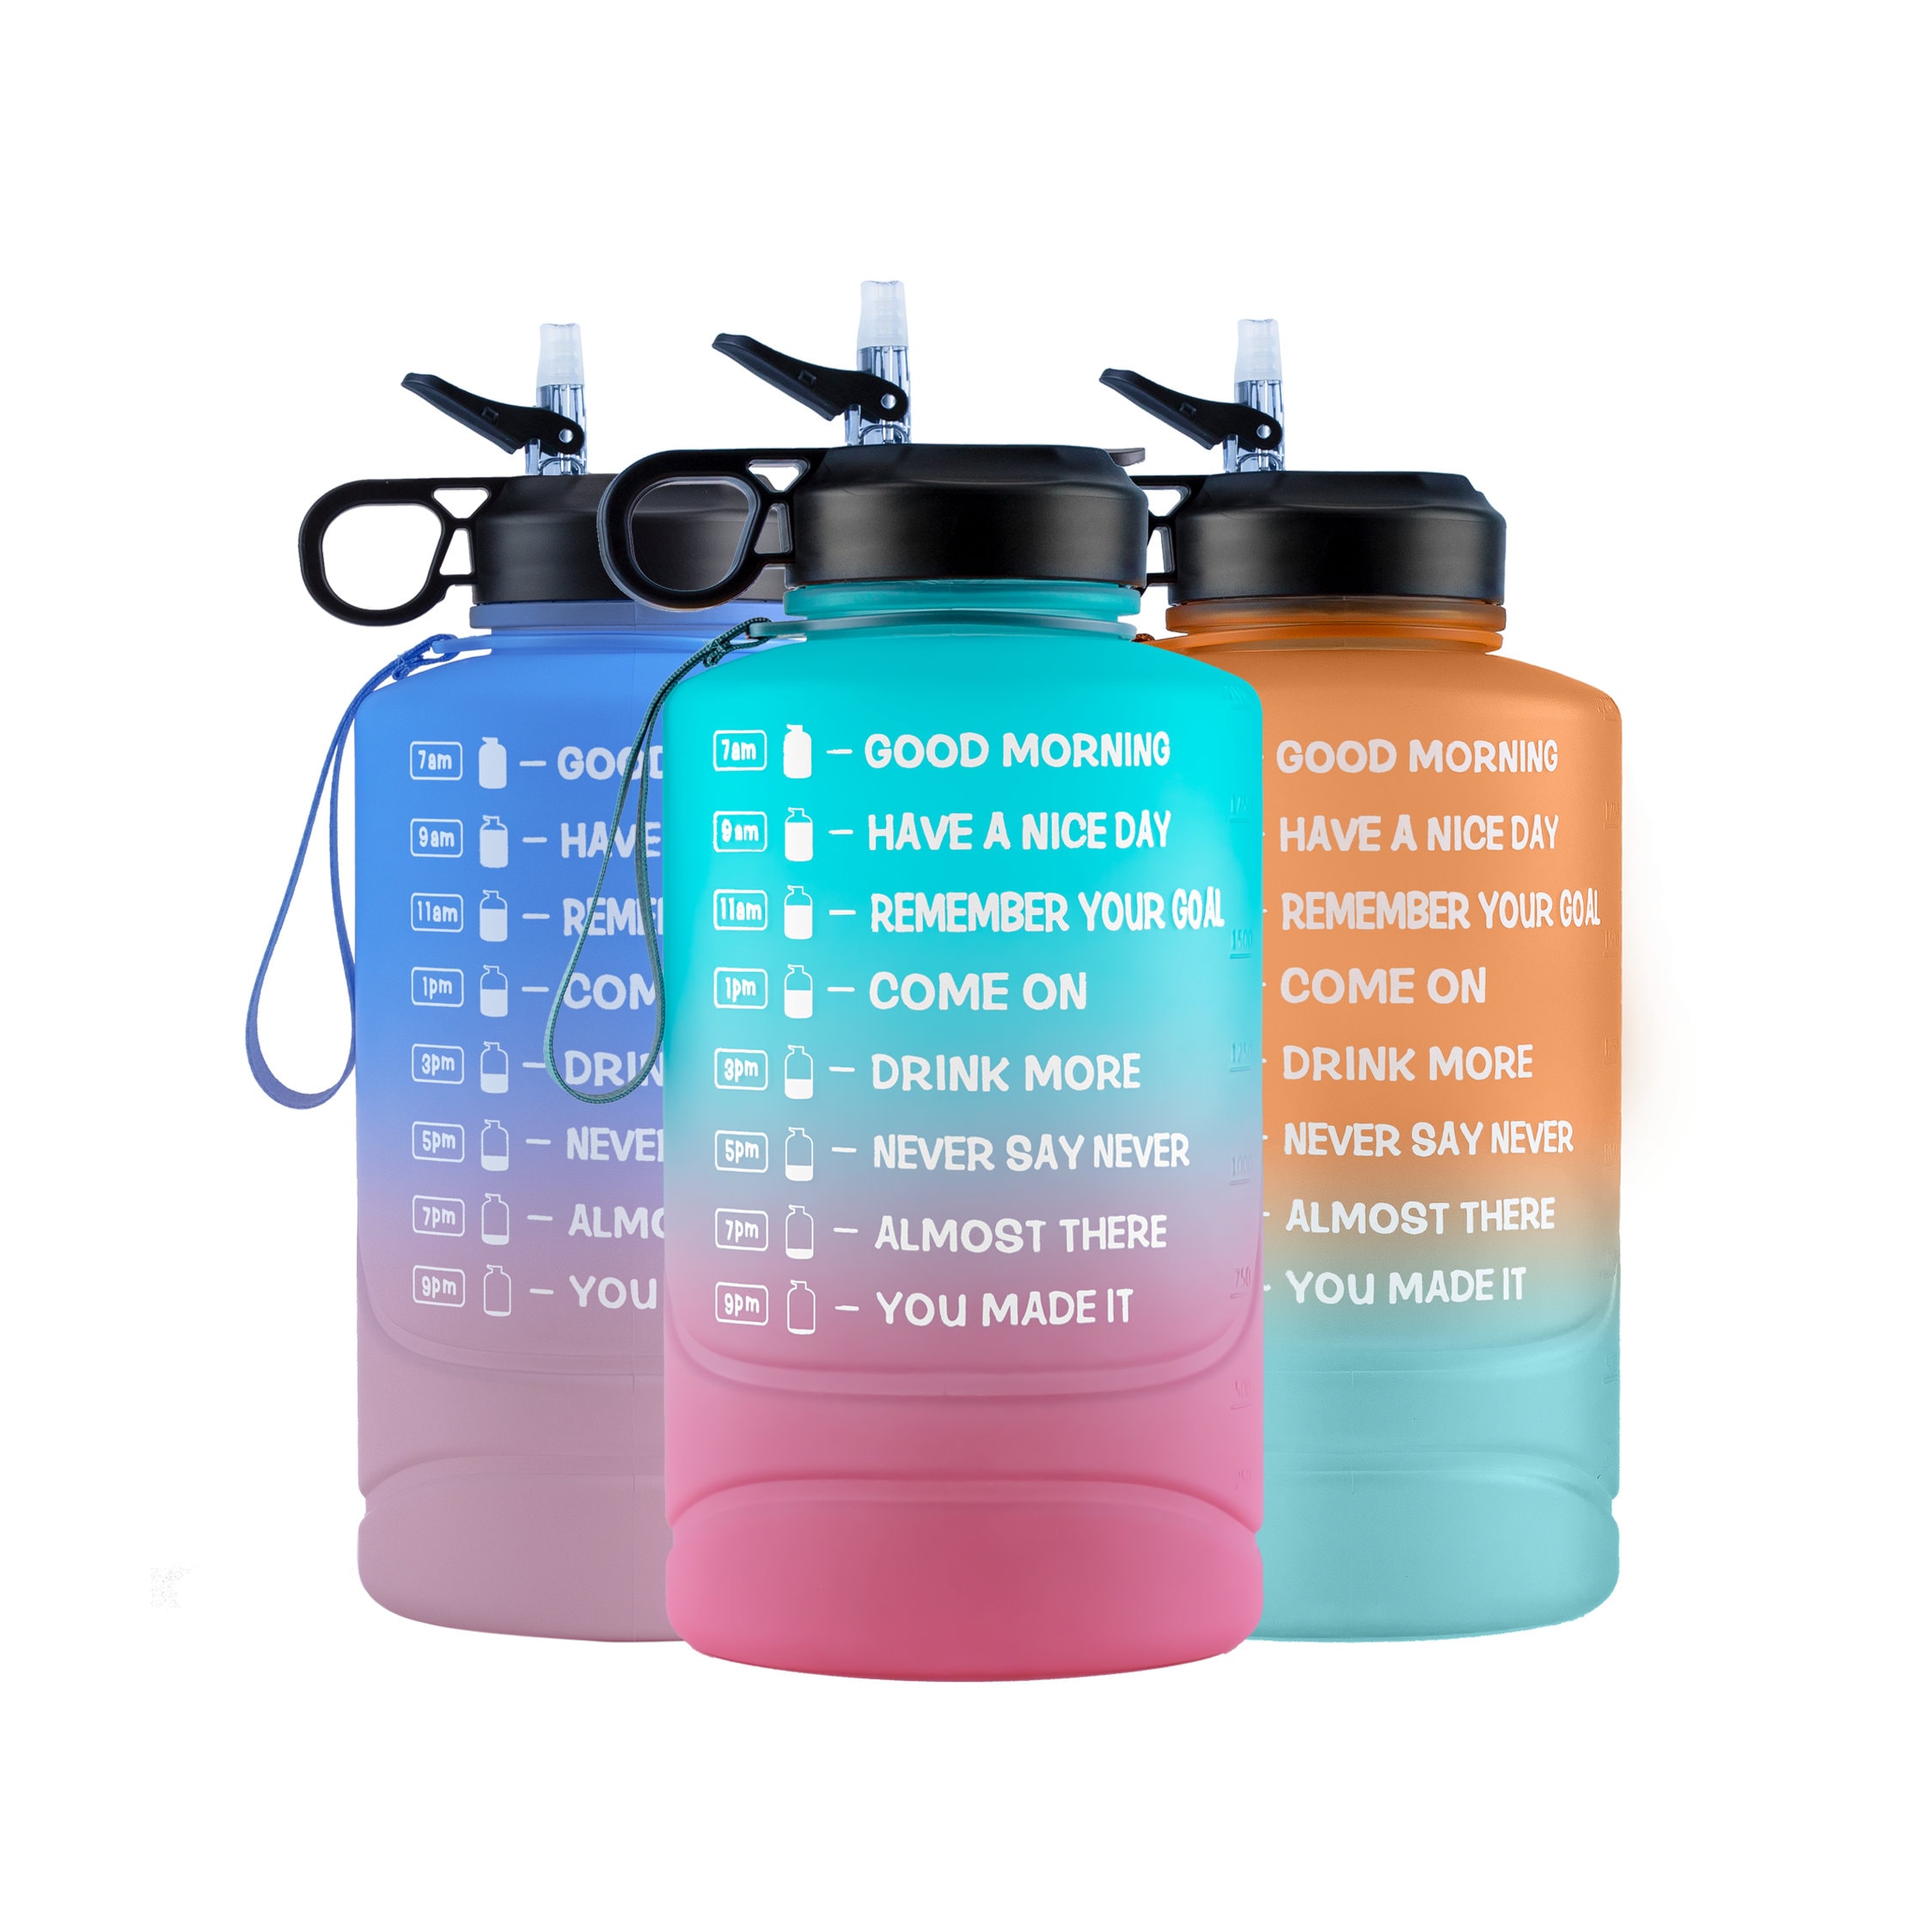 2L motivational water bottle to remind you to drink more water